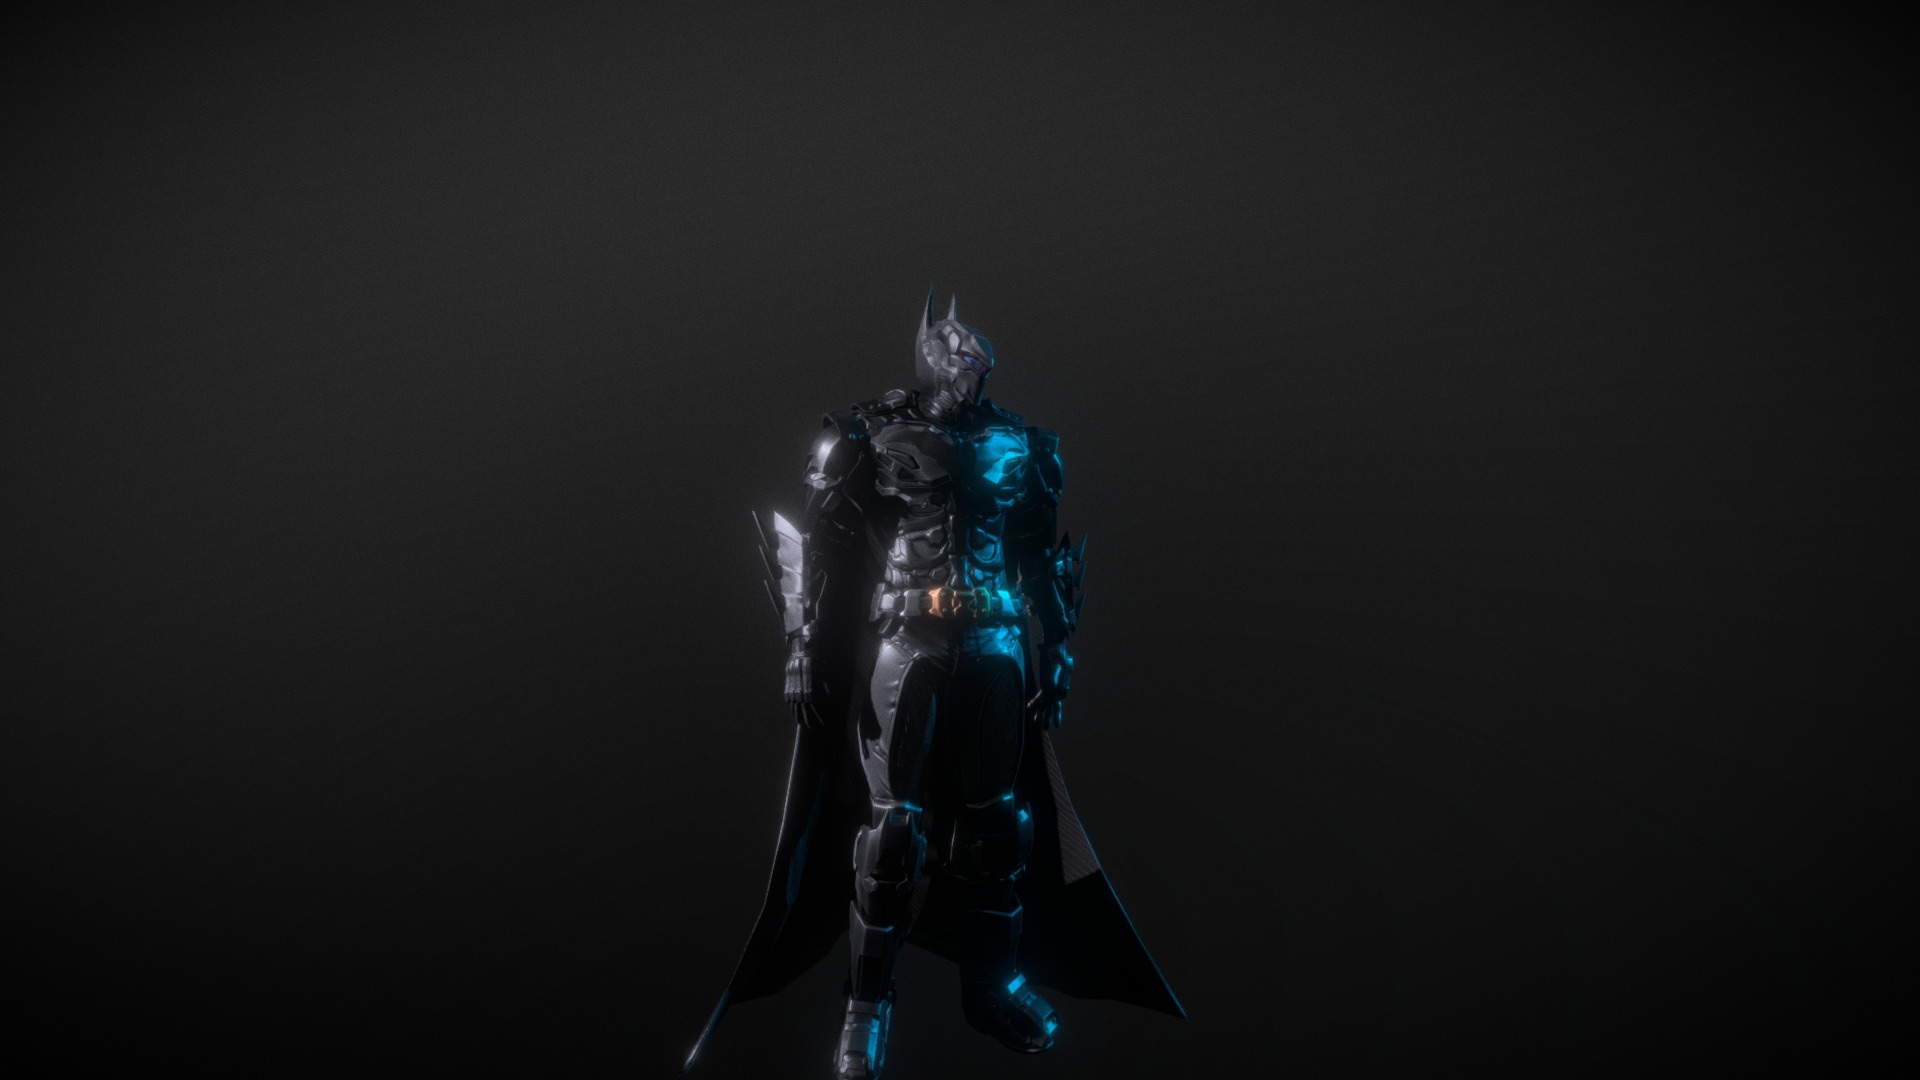 Batman baron the dark knight (lowpoly)
i like movie batman serie  than i will try to remake some new costume and re design .. hope  you guys like it  thx  XD - Batman baron the dark knight (lowpoly) - 3D model by Sherpz-sherpZ (@Astlast) 3d model